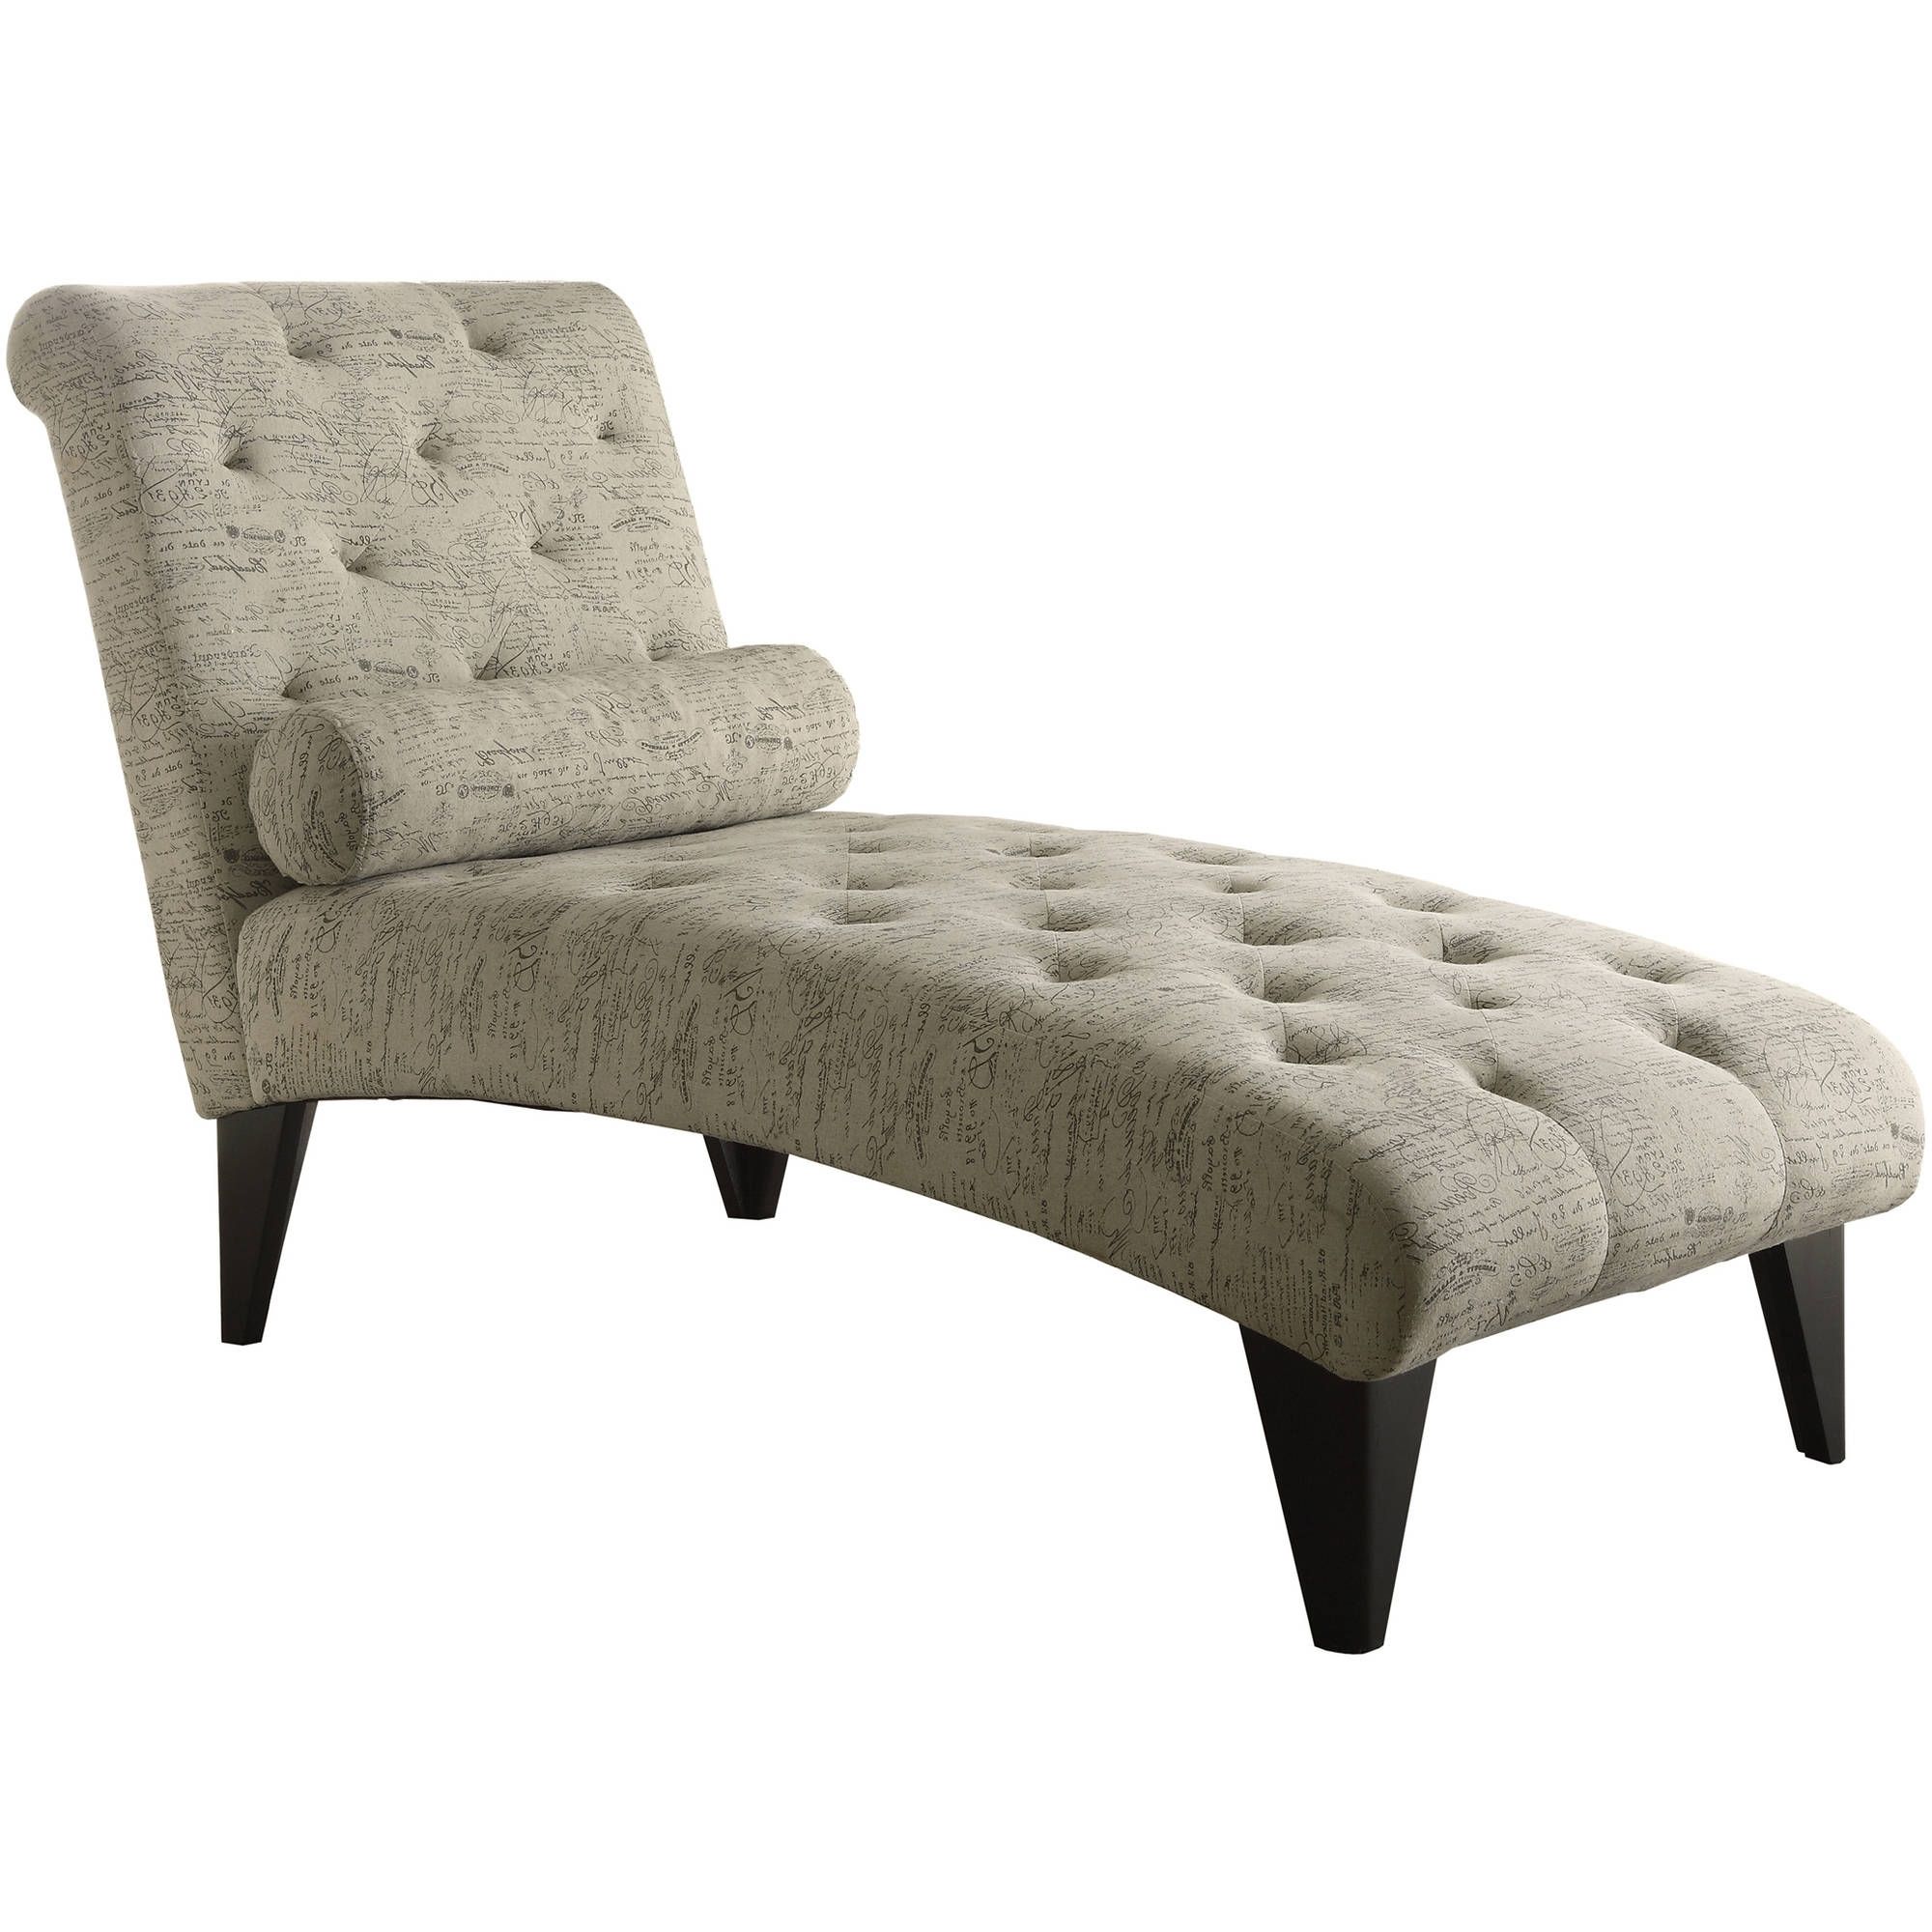 Chaise Lounges – Walmart For Favorite Chaise Lounges (View 6 of 15)